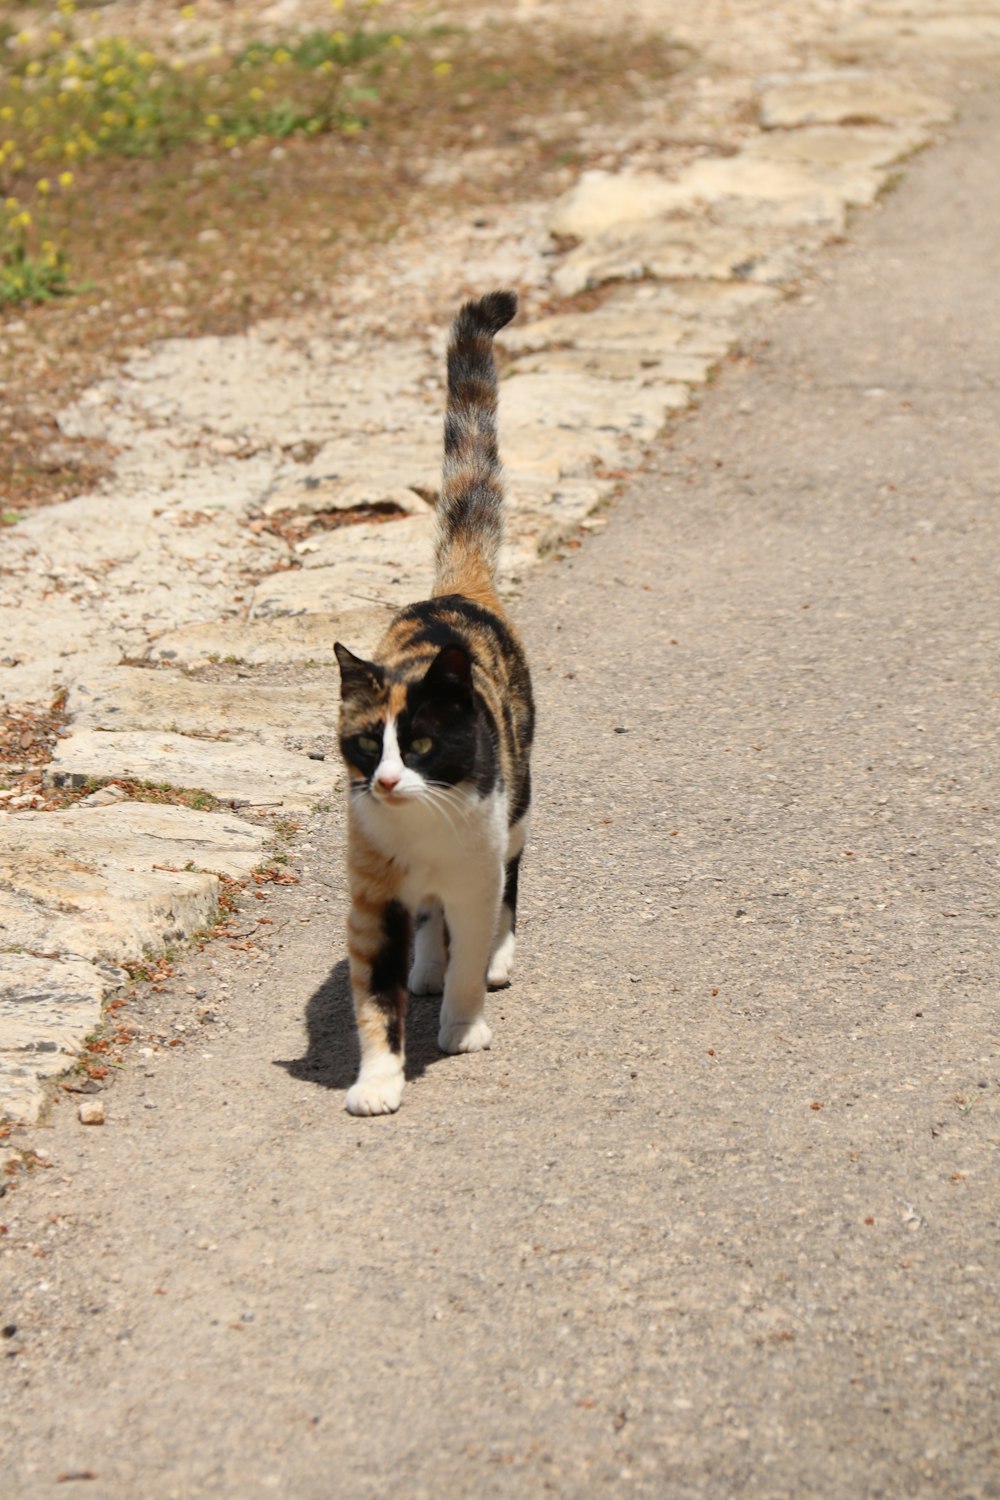 a cat walking down a path in the dirt